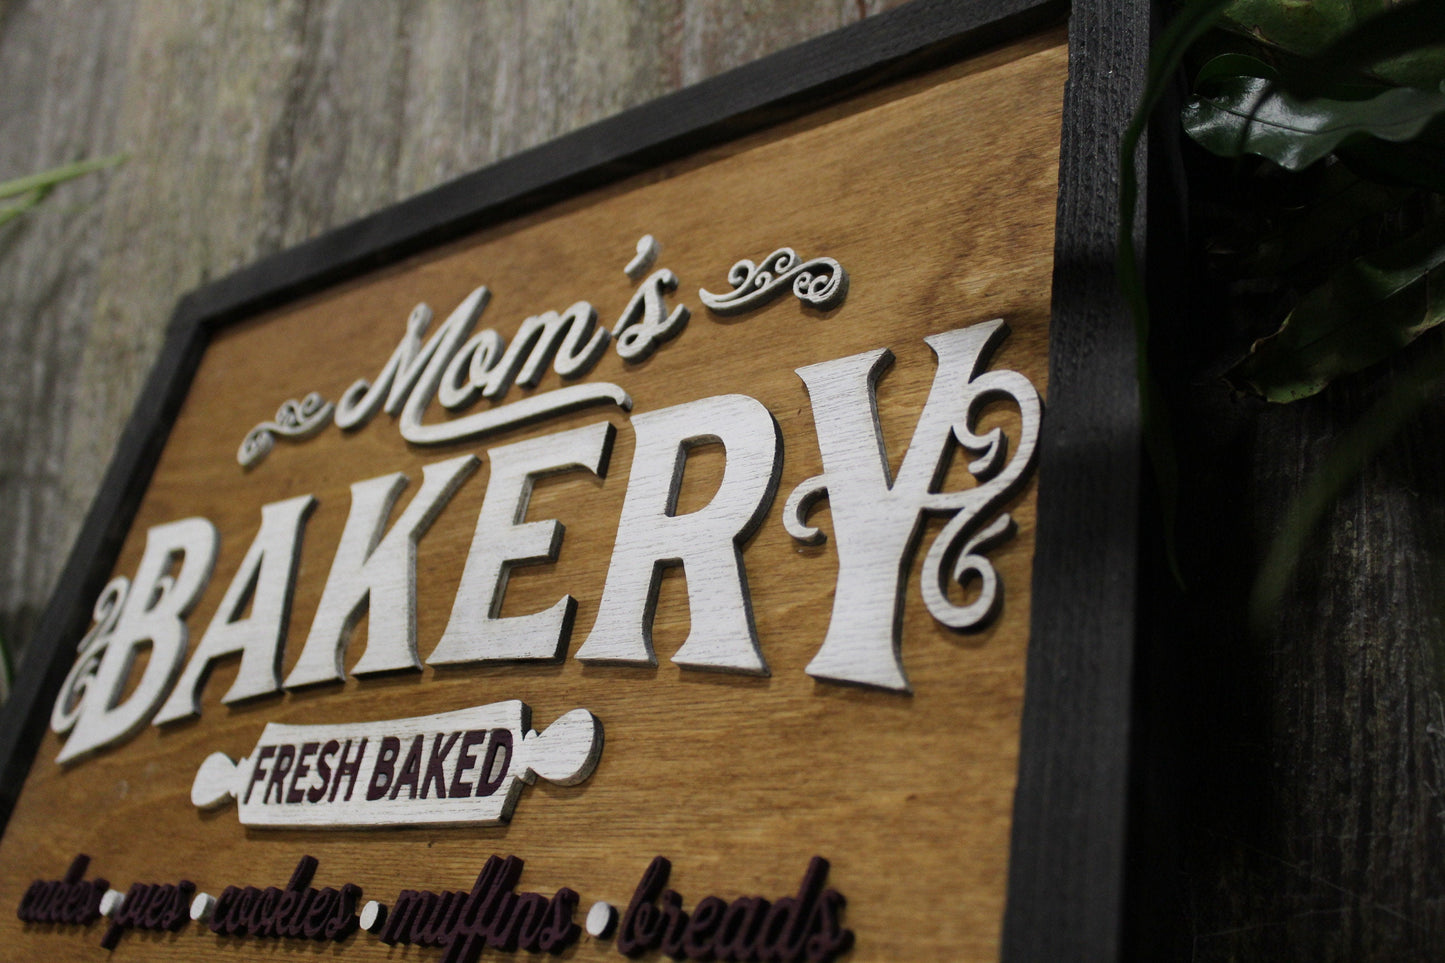 Moms Bakery Wood Sign Served Hot and Fresh Advertising Kitchen Decoration Country Farmhouse Rustic Wall Art 3D Raised Text Words Pies Breads